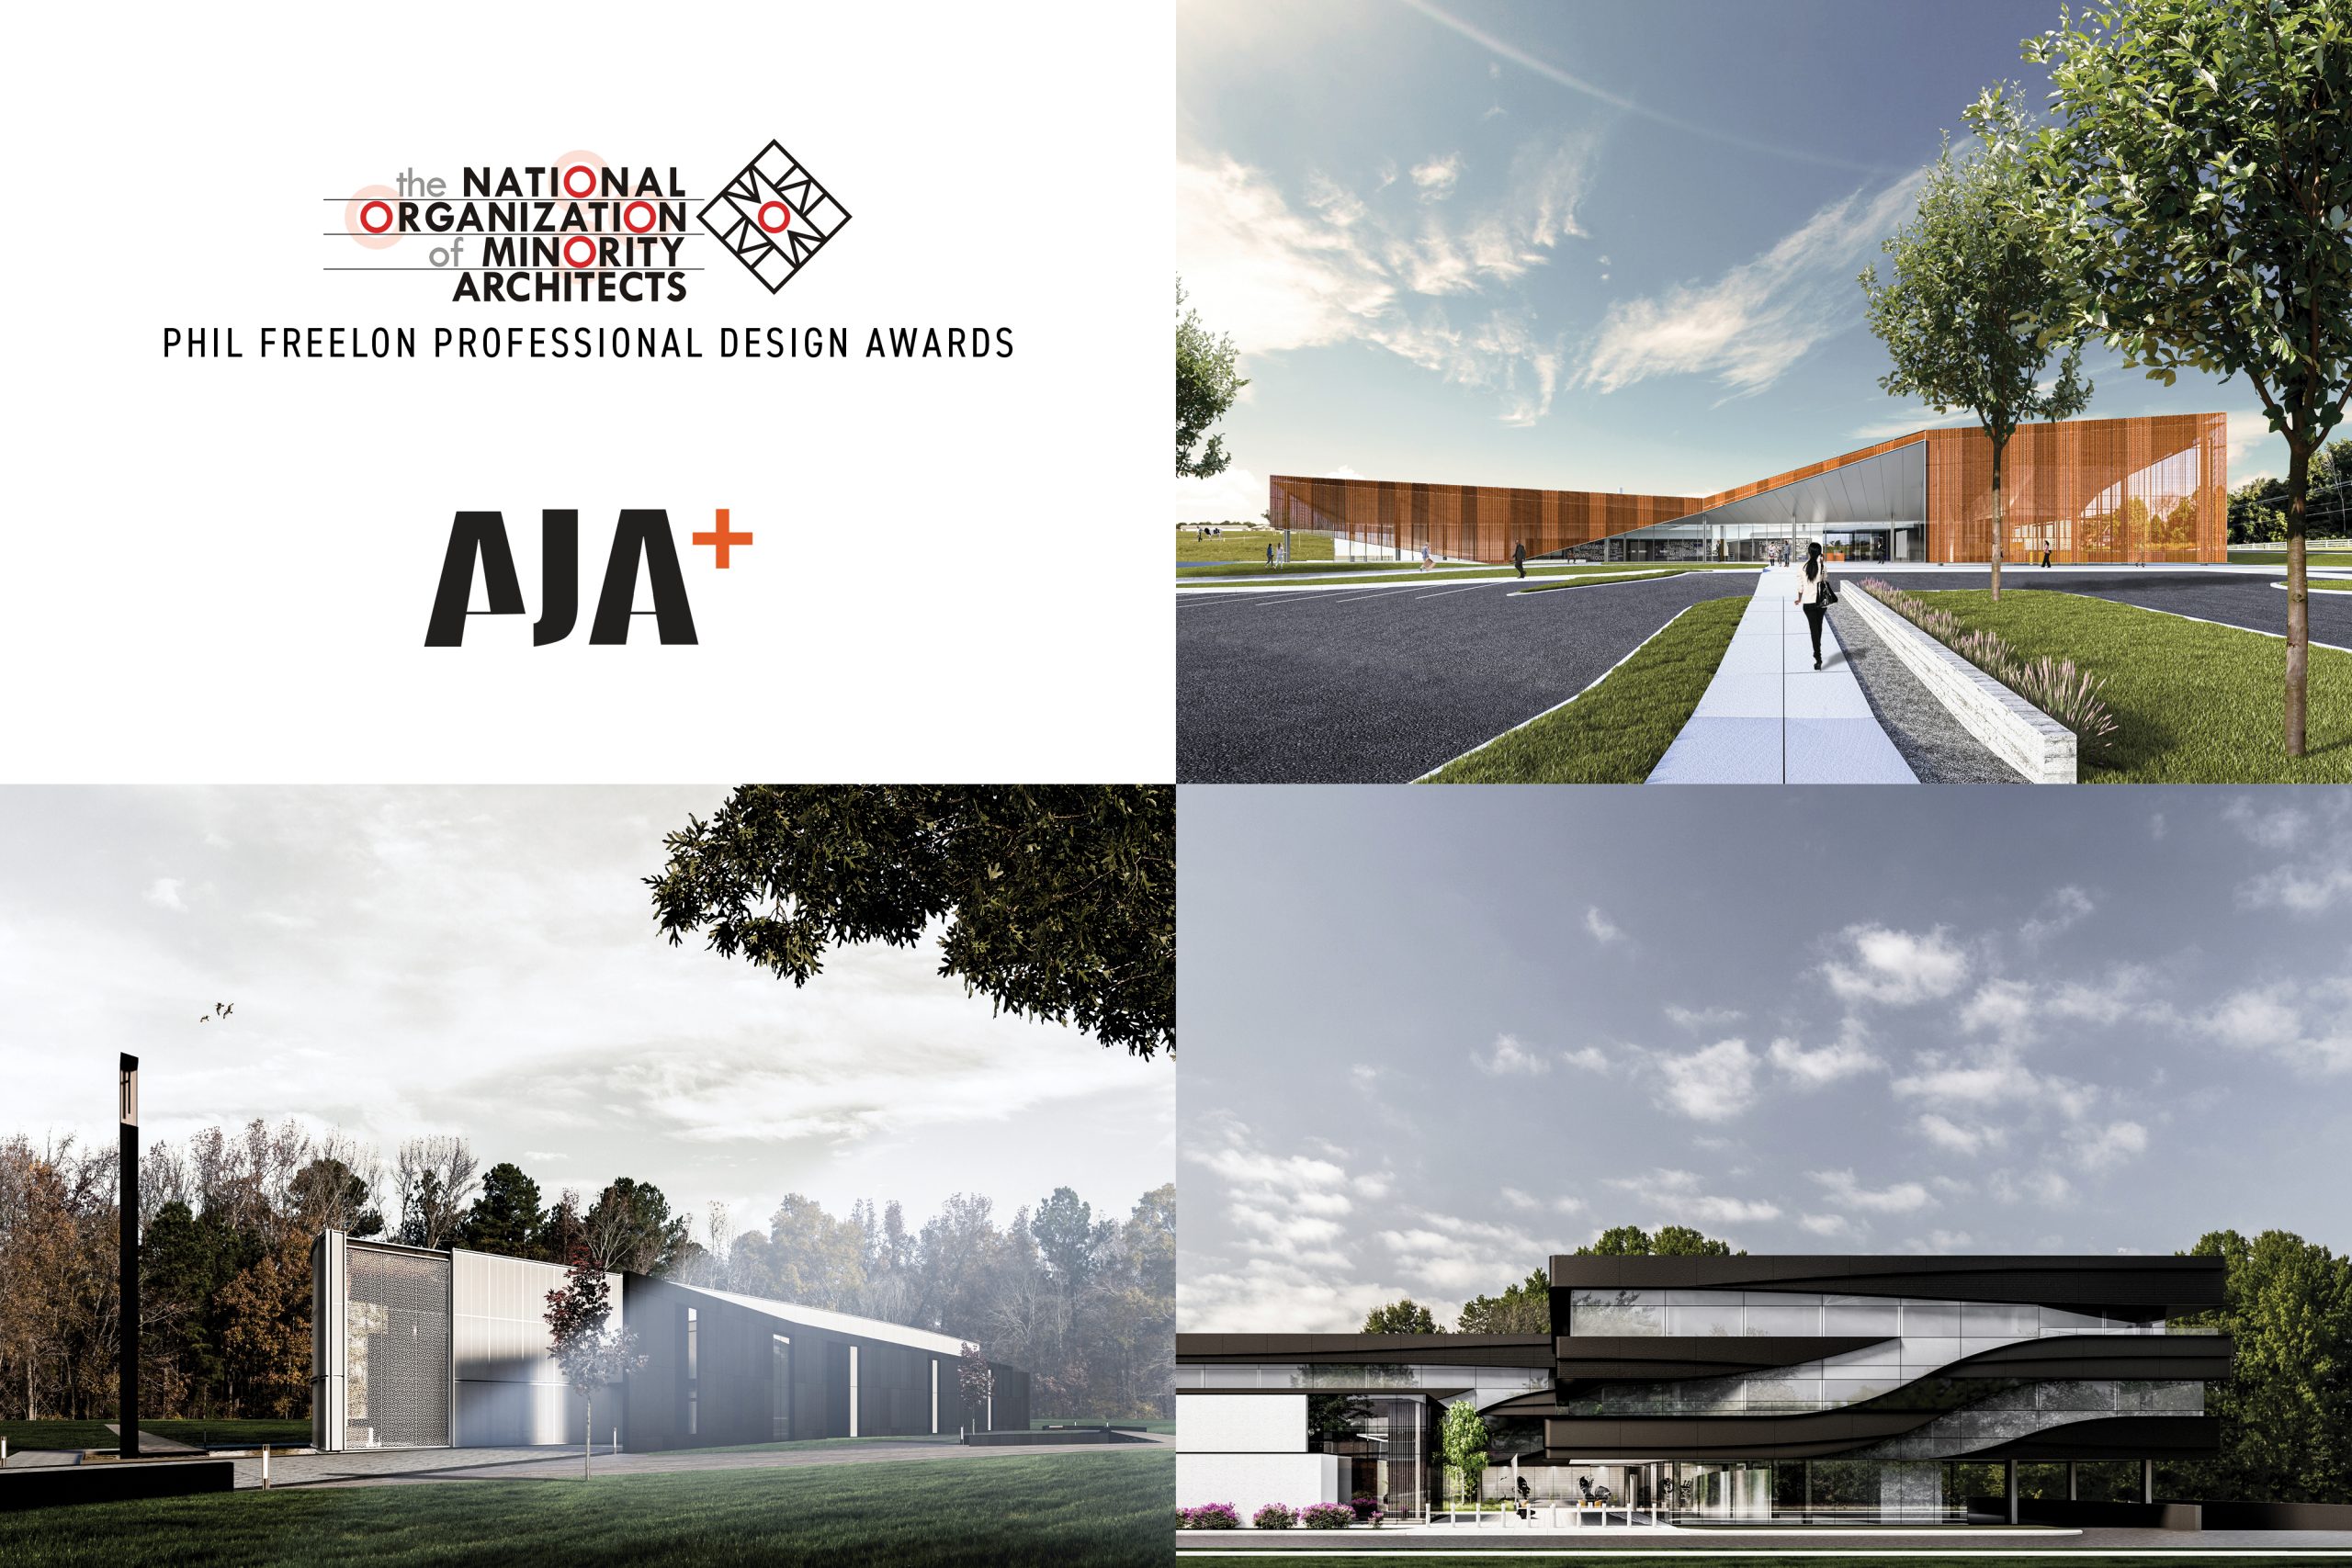 Andre Johnson Architects’ Projects Receive 3 NOMA Design Excellence Awards